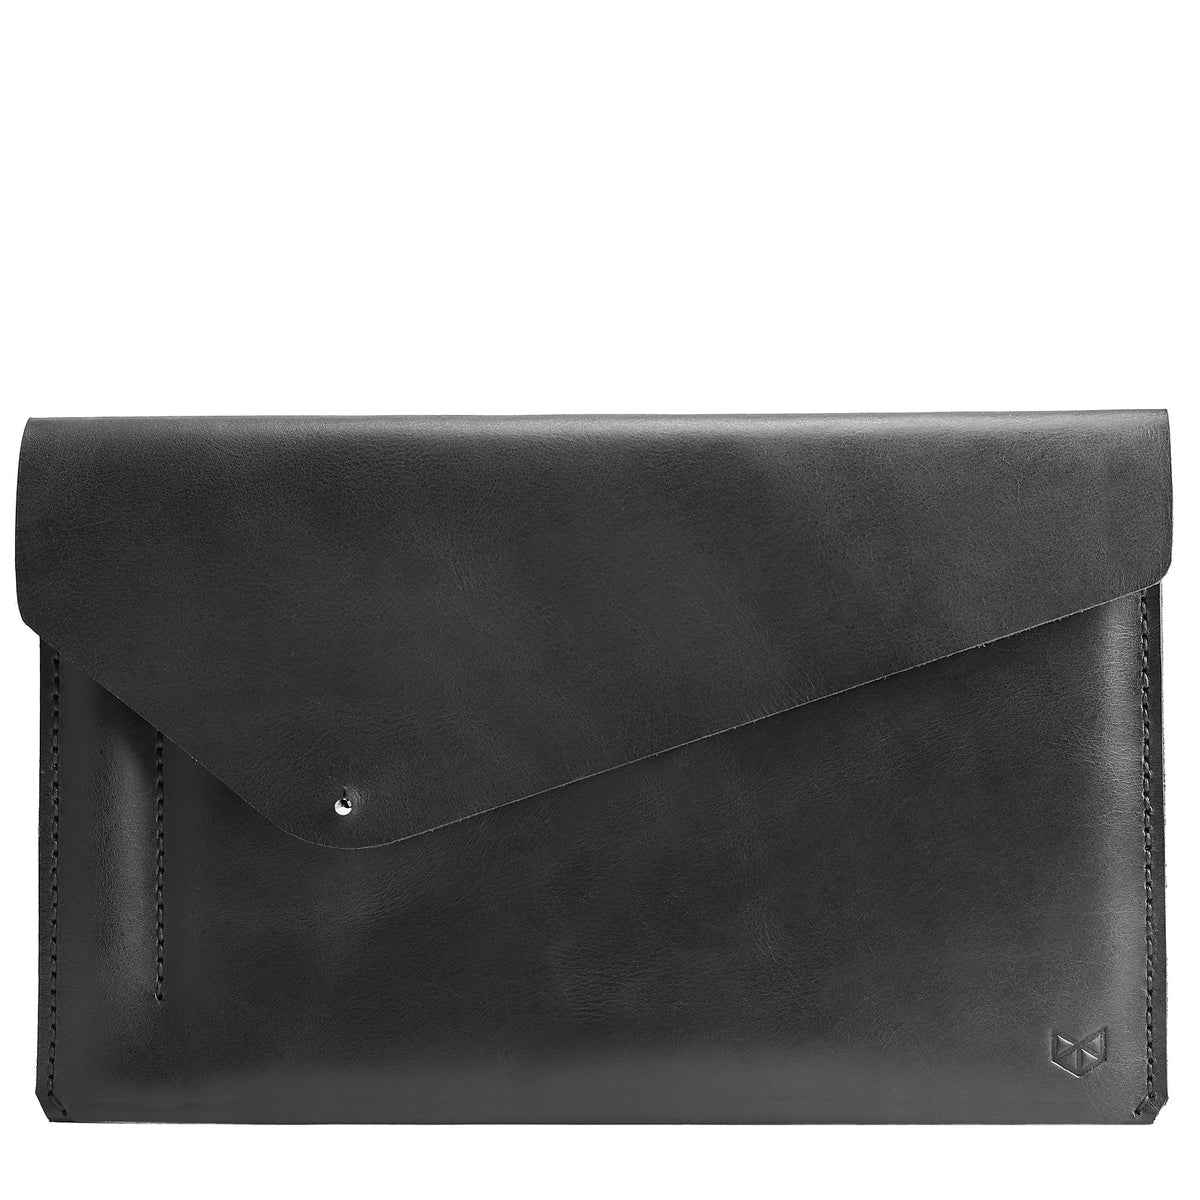 Cover. Black Leather reMarkable 1 Cover Case Sleeve With Marker Holder by Capra Leather